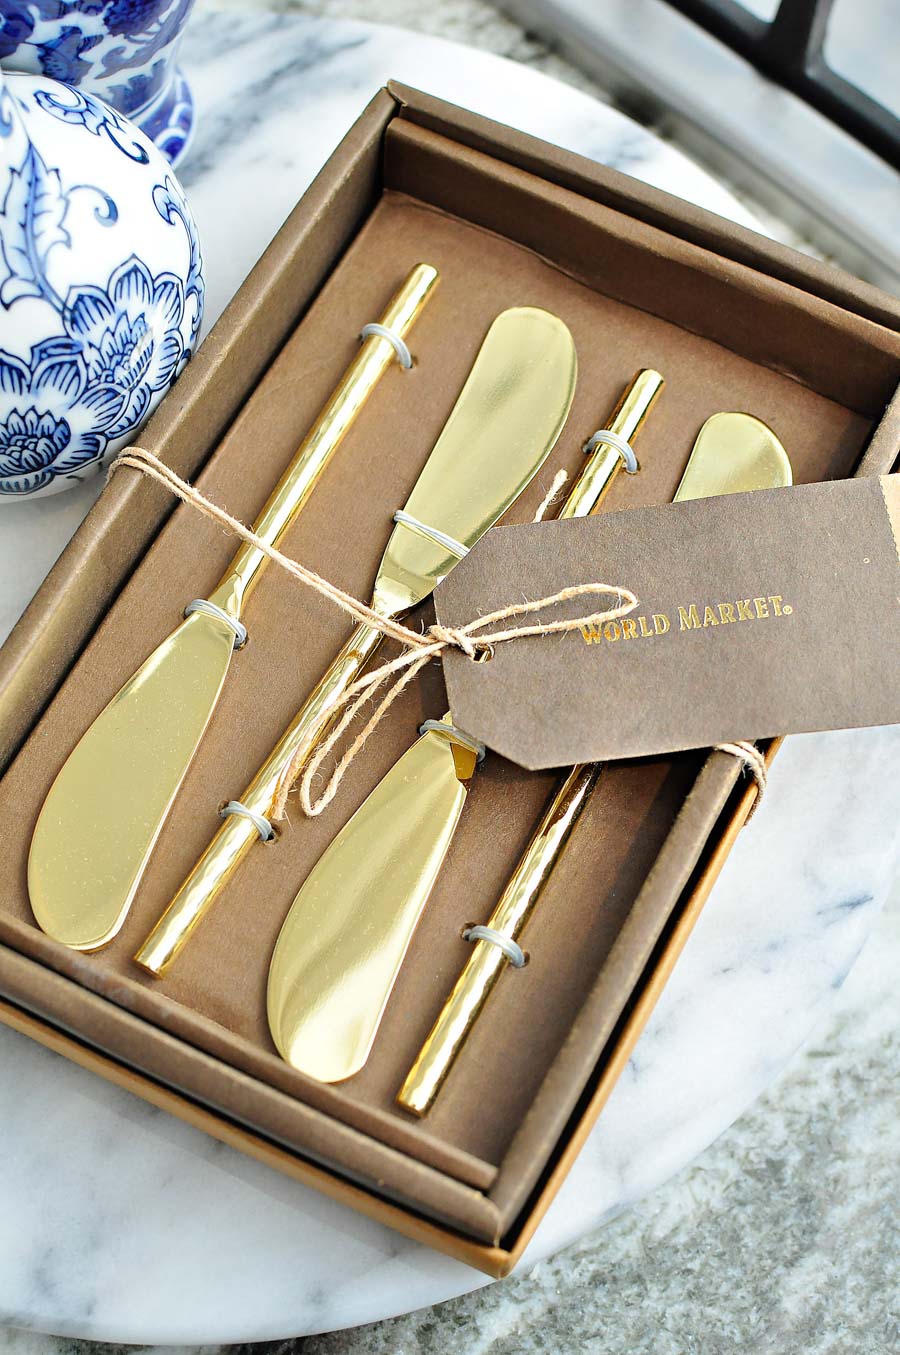 Gold hammered cocktail spreaders are a must have for cheese boards and holiday entertaining.